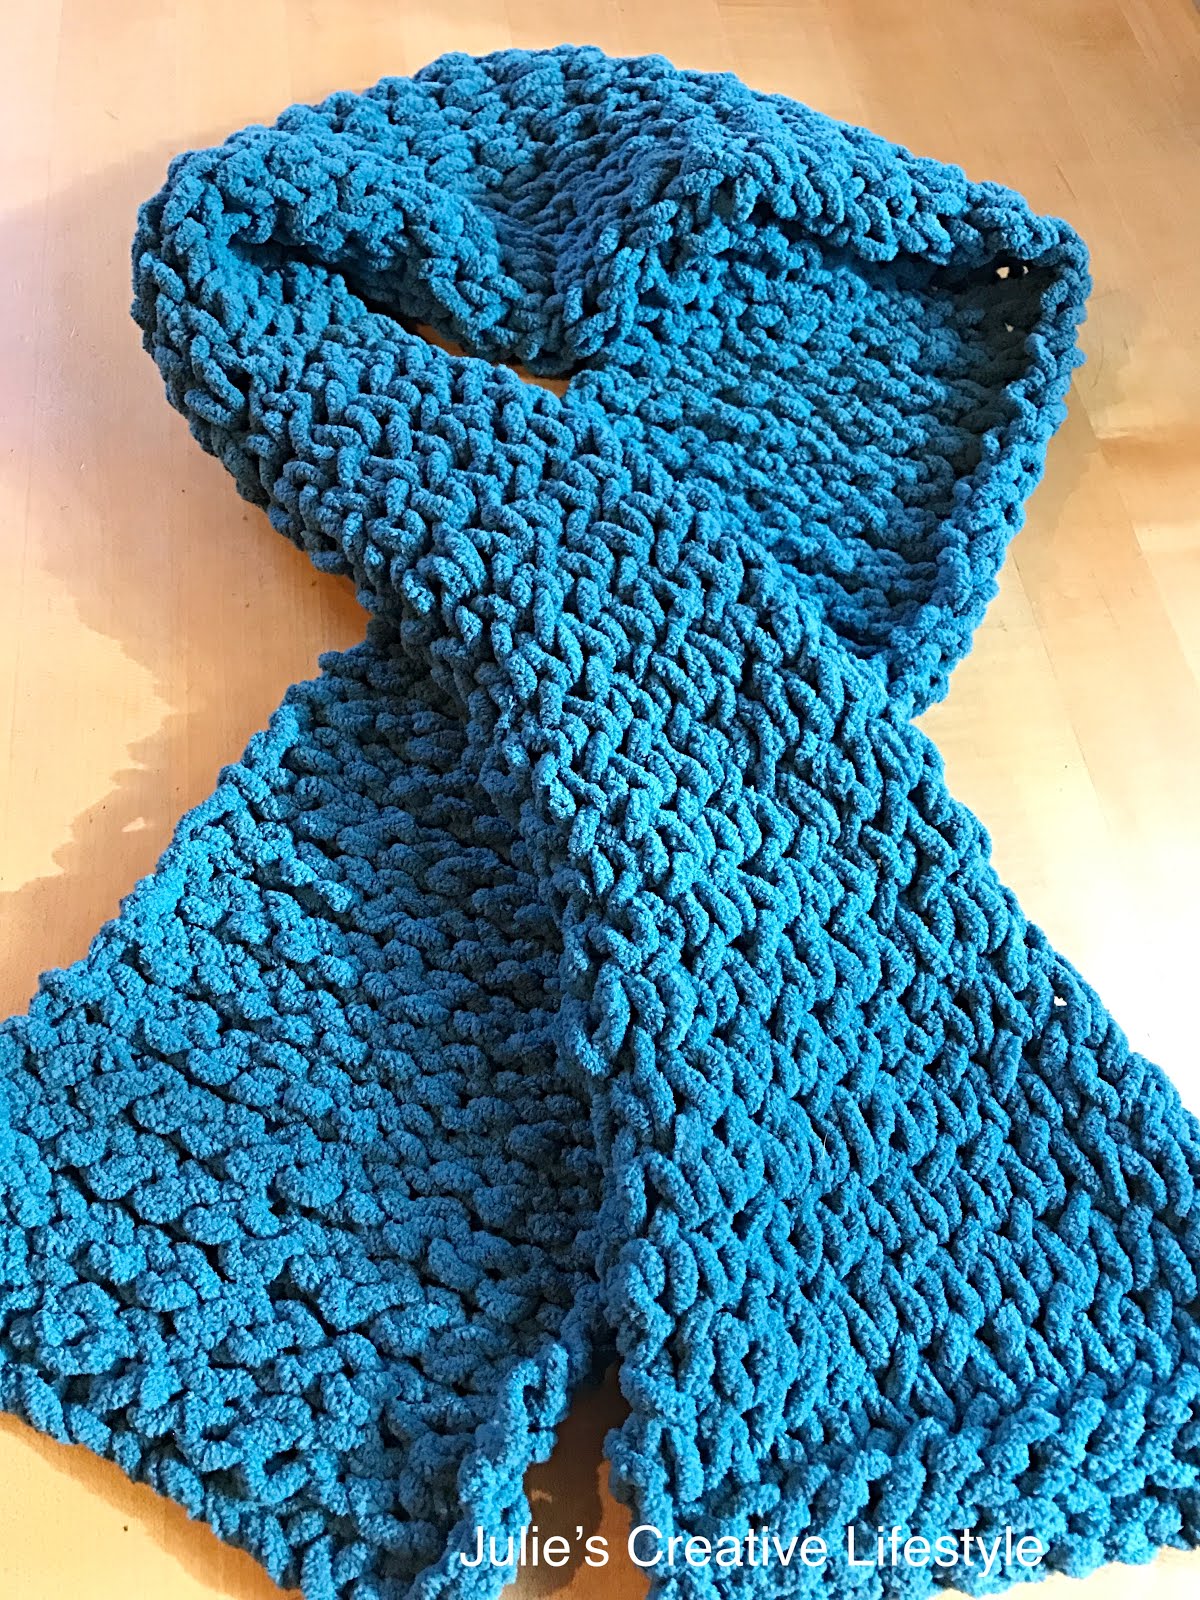 Making a Knit Scarf Using Blanket Yarn | Julie's Creative Lifestyle